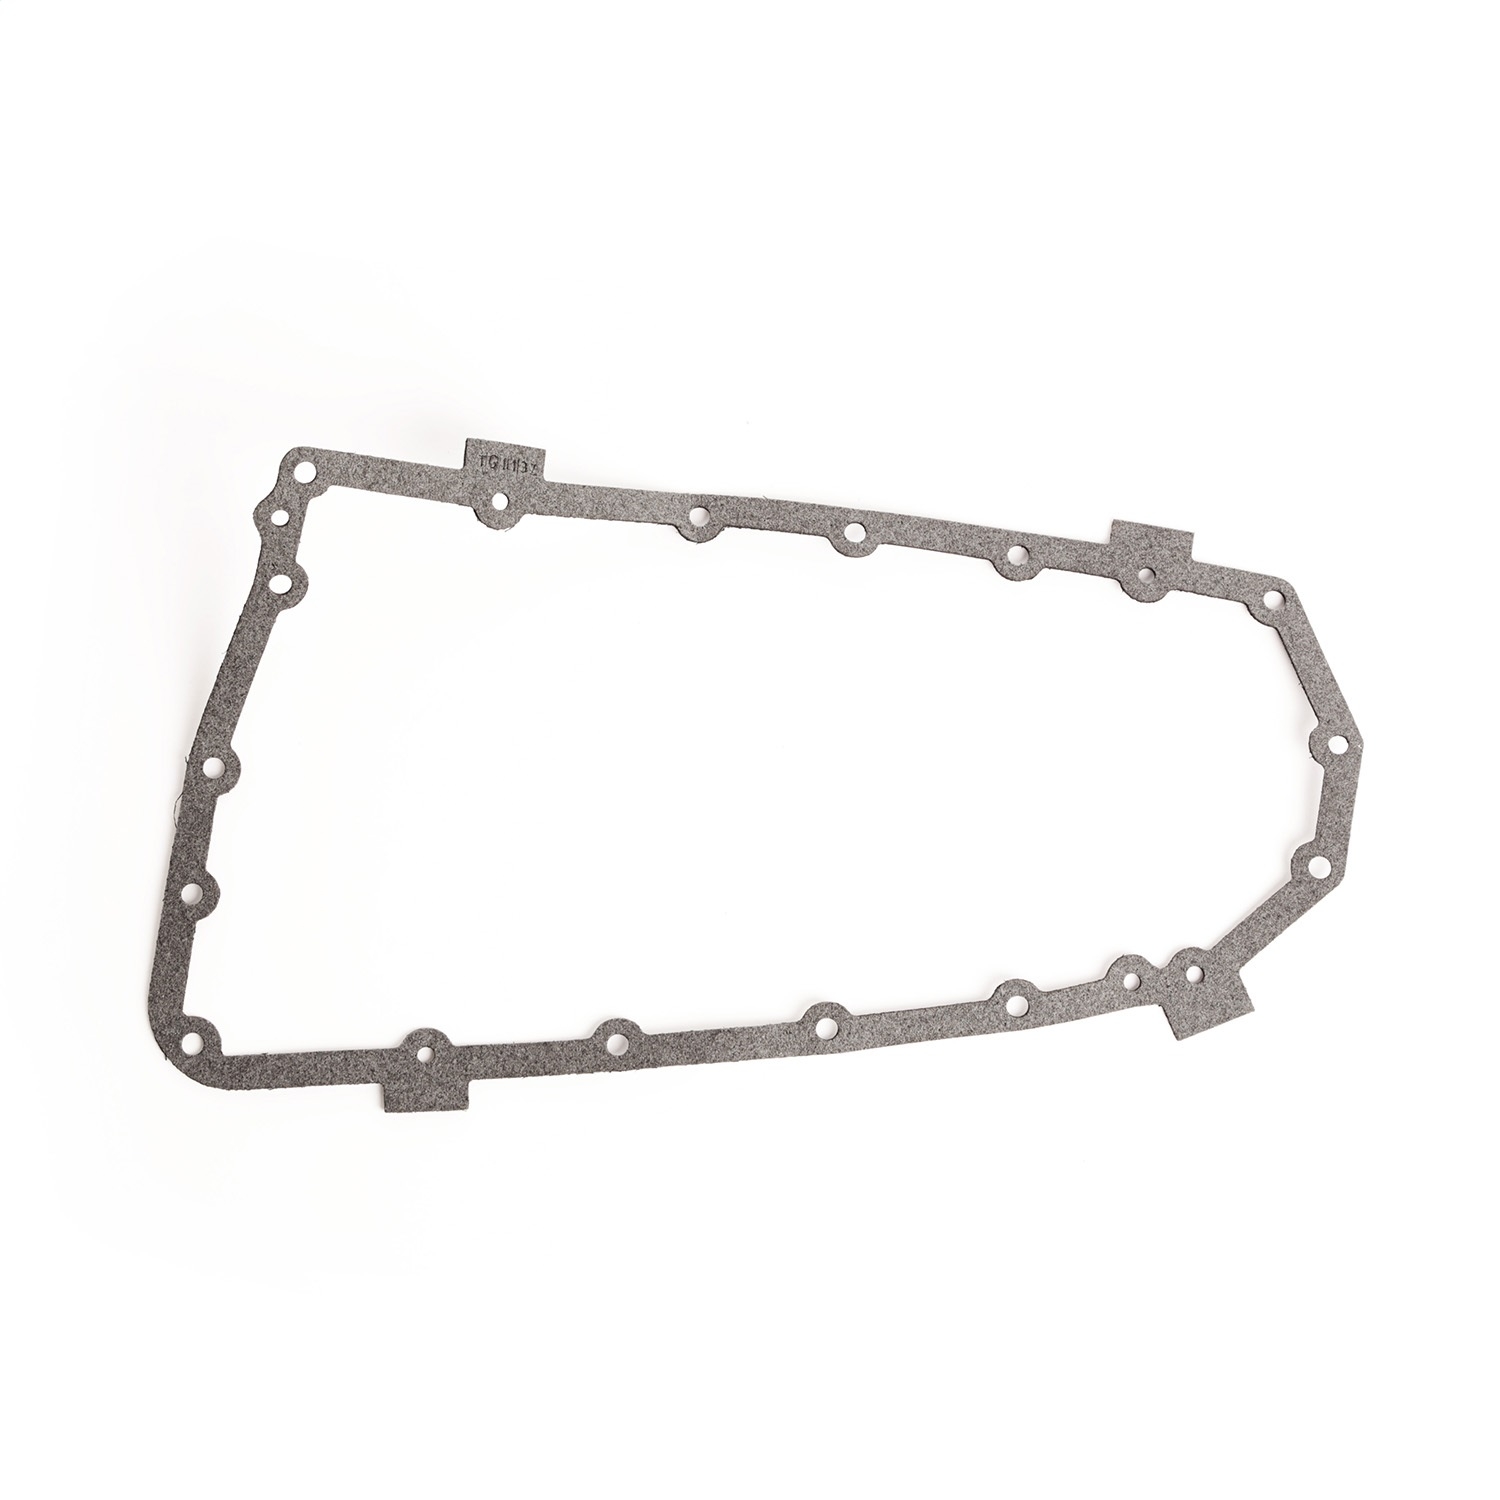 Jeep Omix This Oil Pan Gasket From Omix Fits 2.0L, And 2.4L Gema Engines Found In 07-16 Compass,